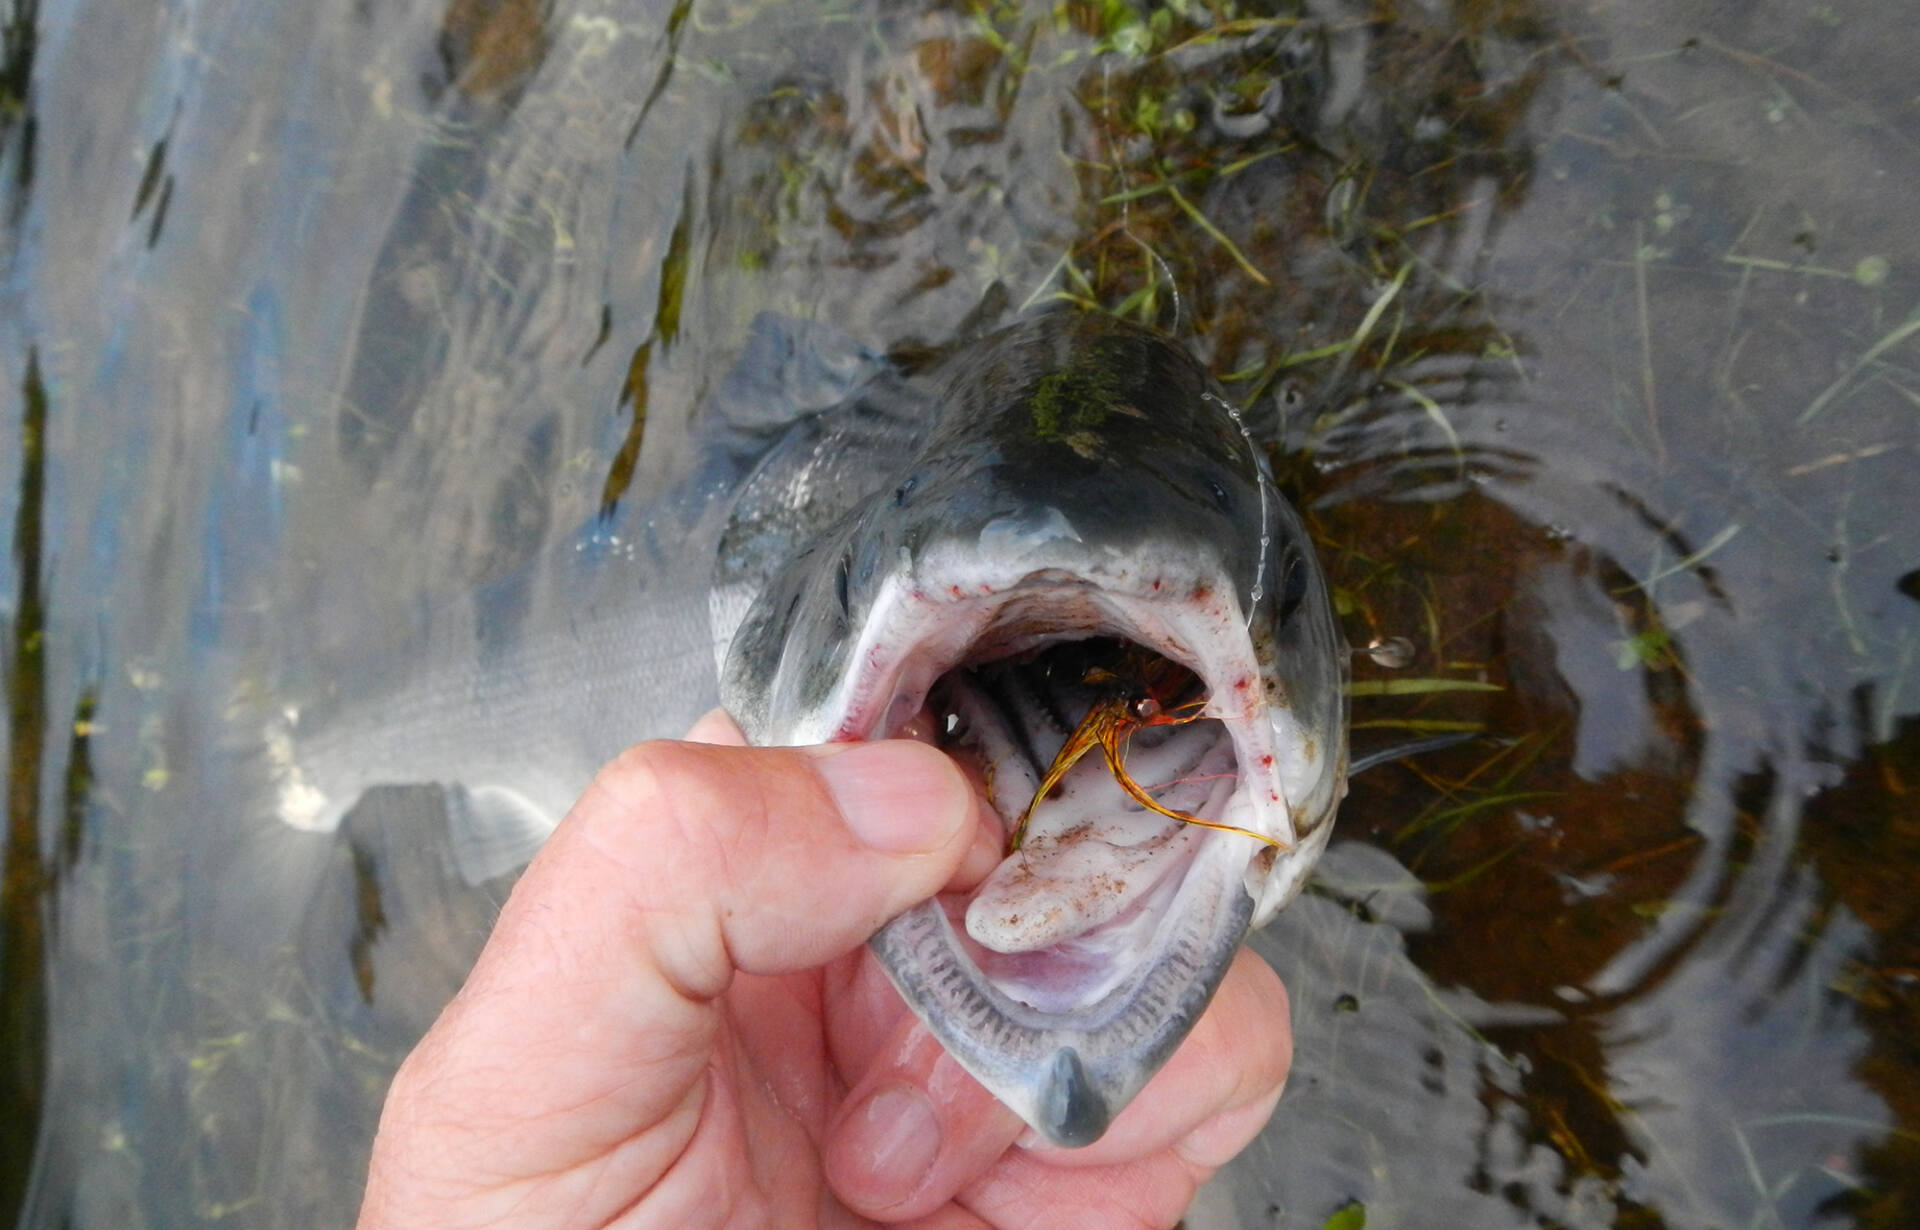 A deeply hooked fish, which can often occur when hand-lining, or when the fly is fished faster. A point which reiterates the use of barbless hooks.